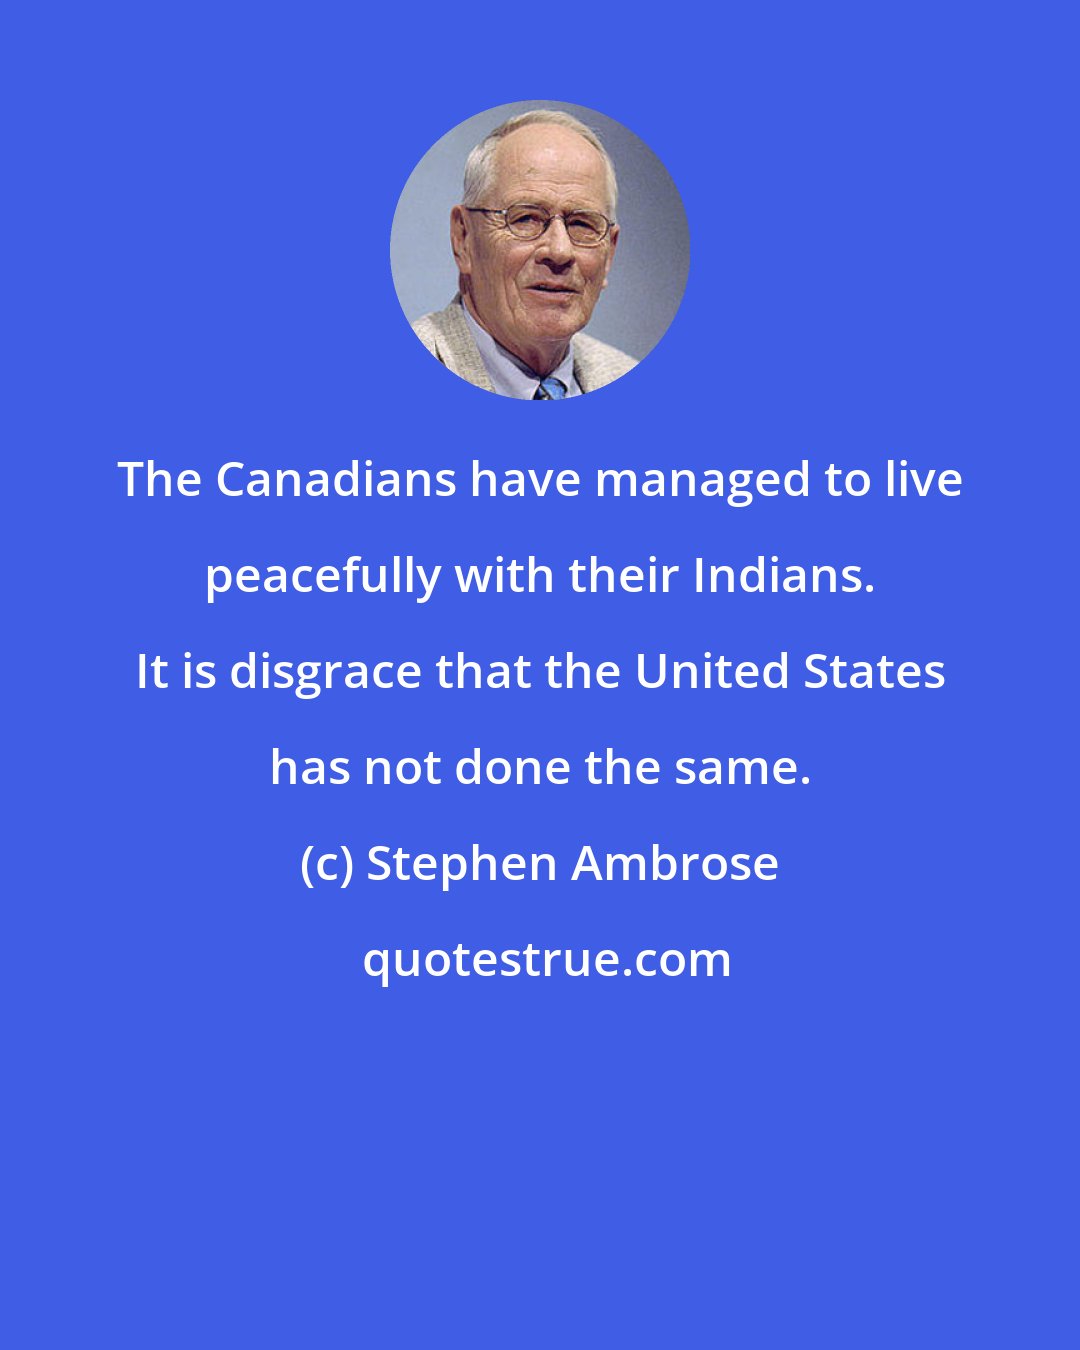 Stephen Ambrose: The Canadians have managed to live peacefully with their Indians. It is disgrace that the United States has not done the same.